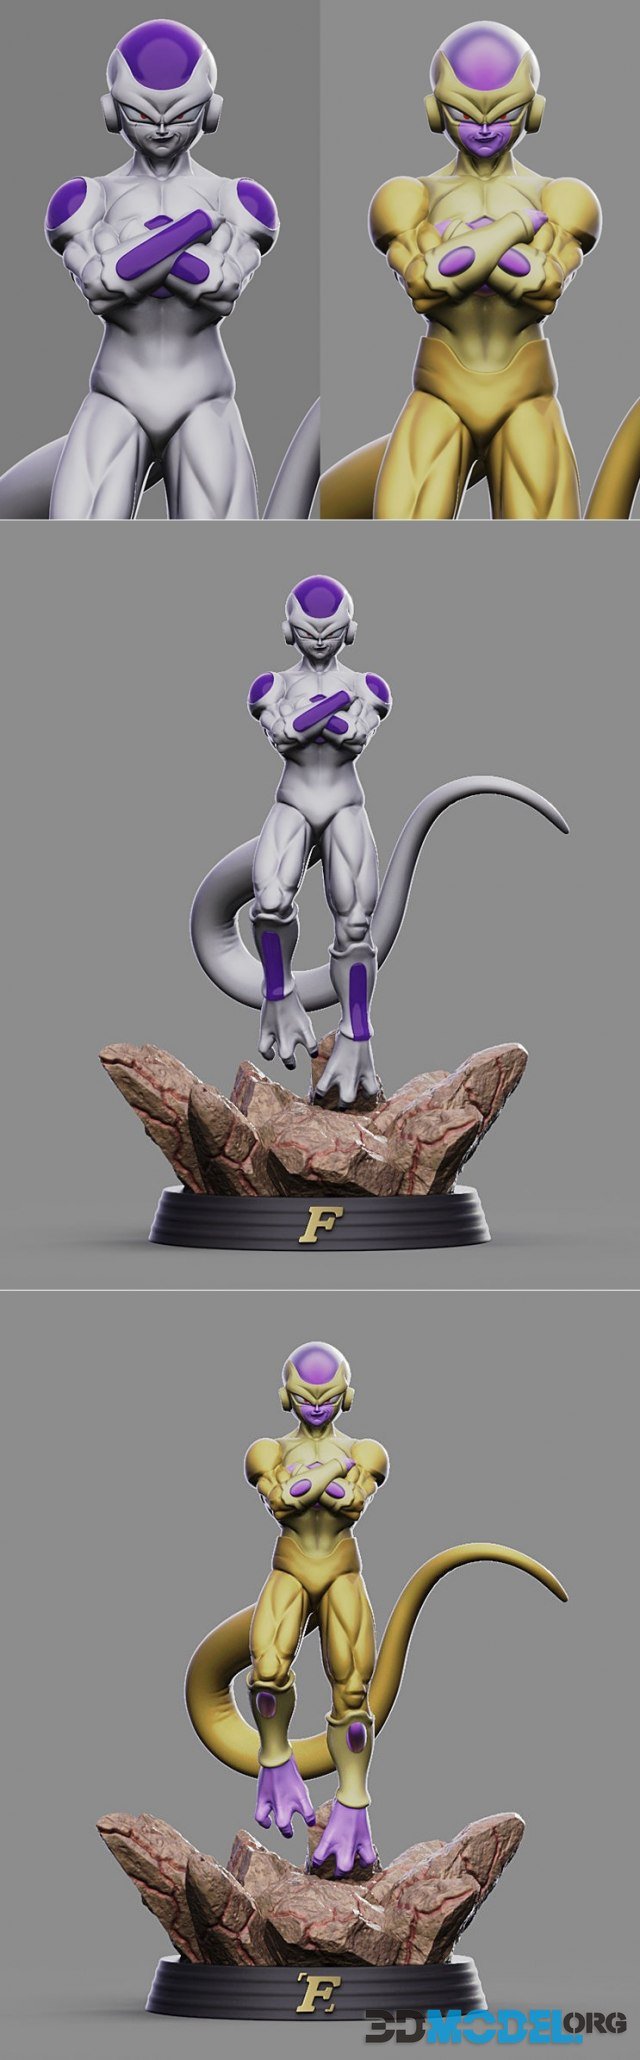 Frieza and Golden Frieza – Printable